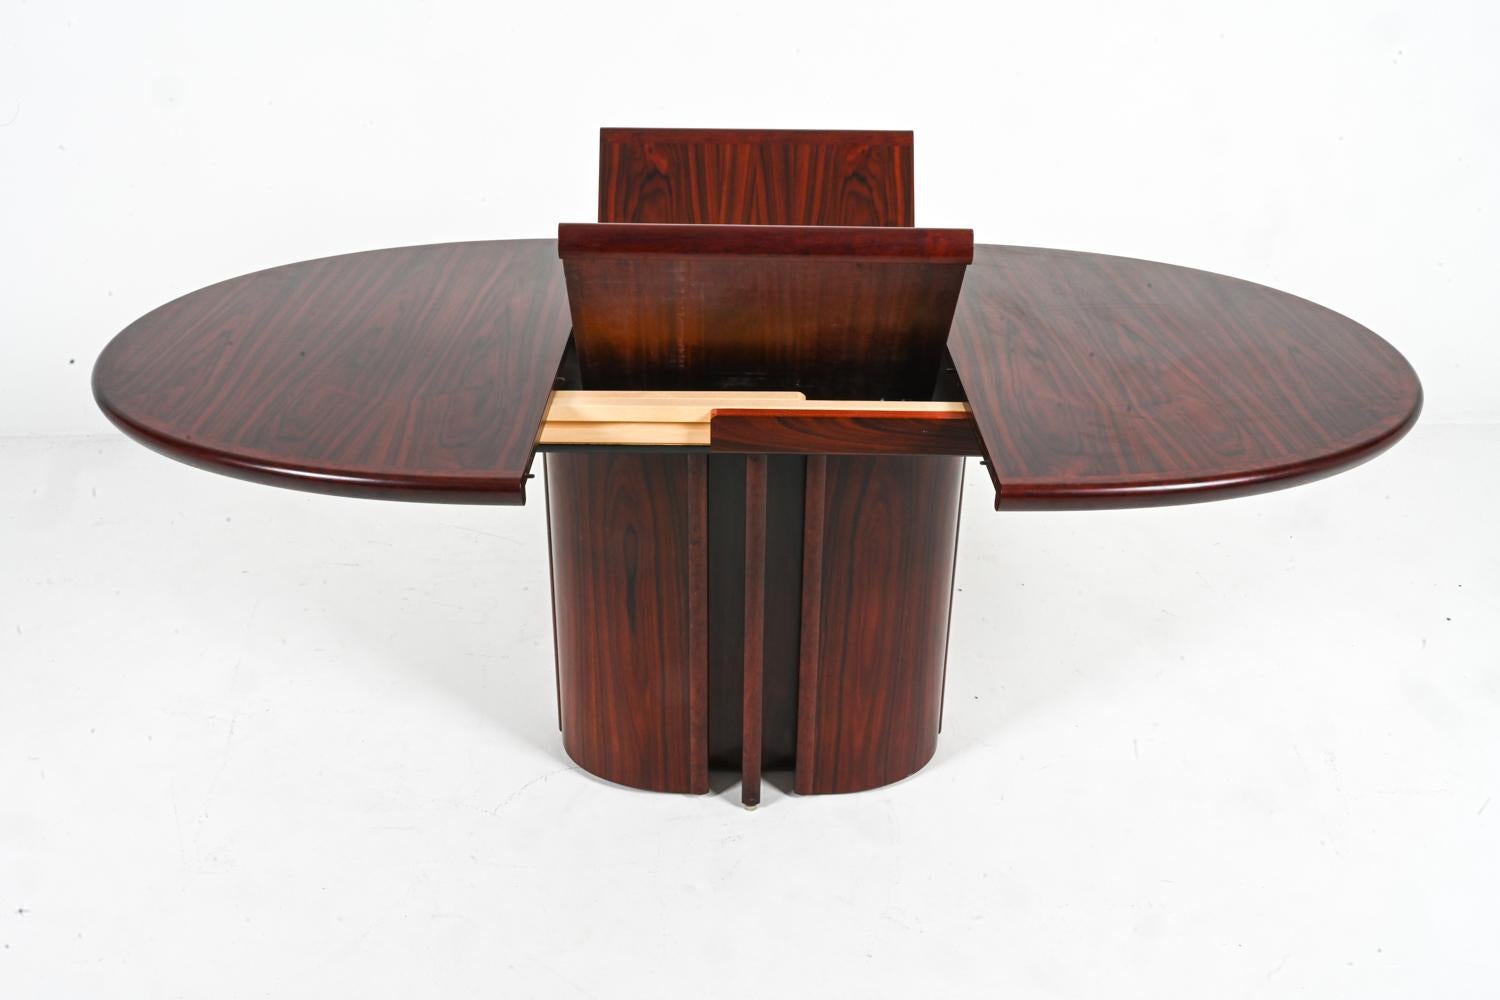 Art Deco-Style Butterfly Leaf Dining Table by Skovby, Denmark 1970's For Sale 1